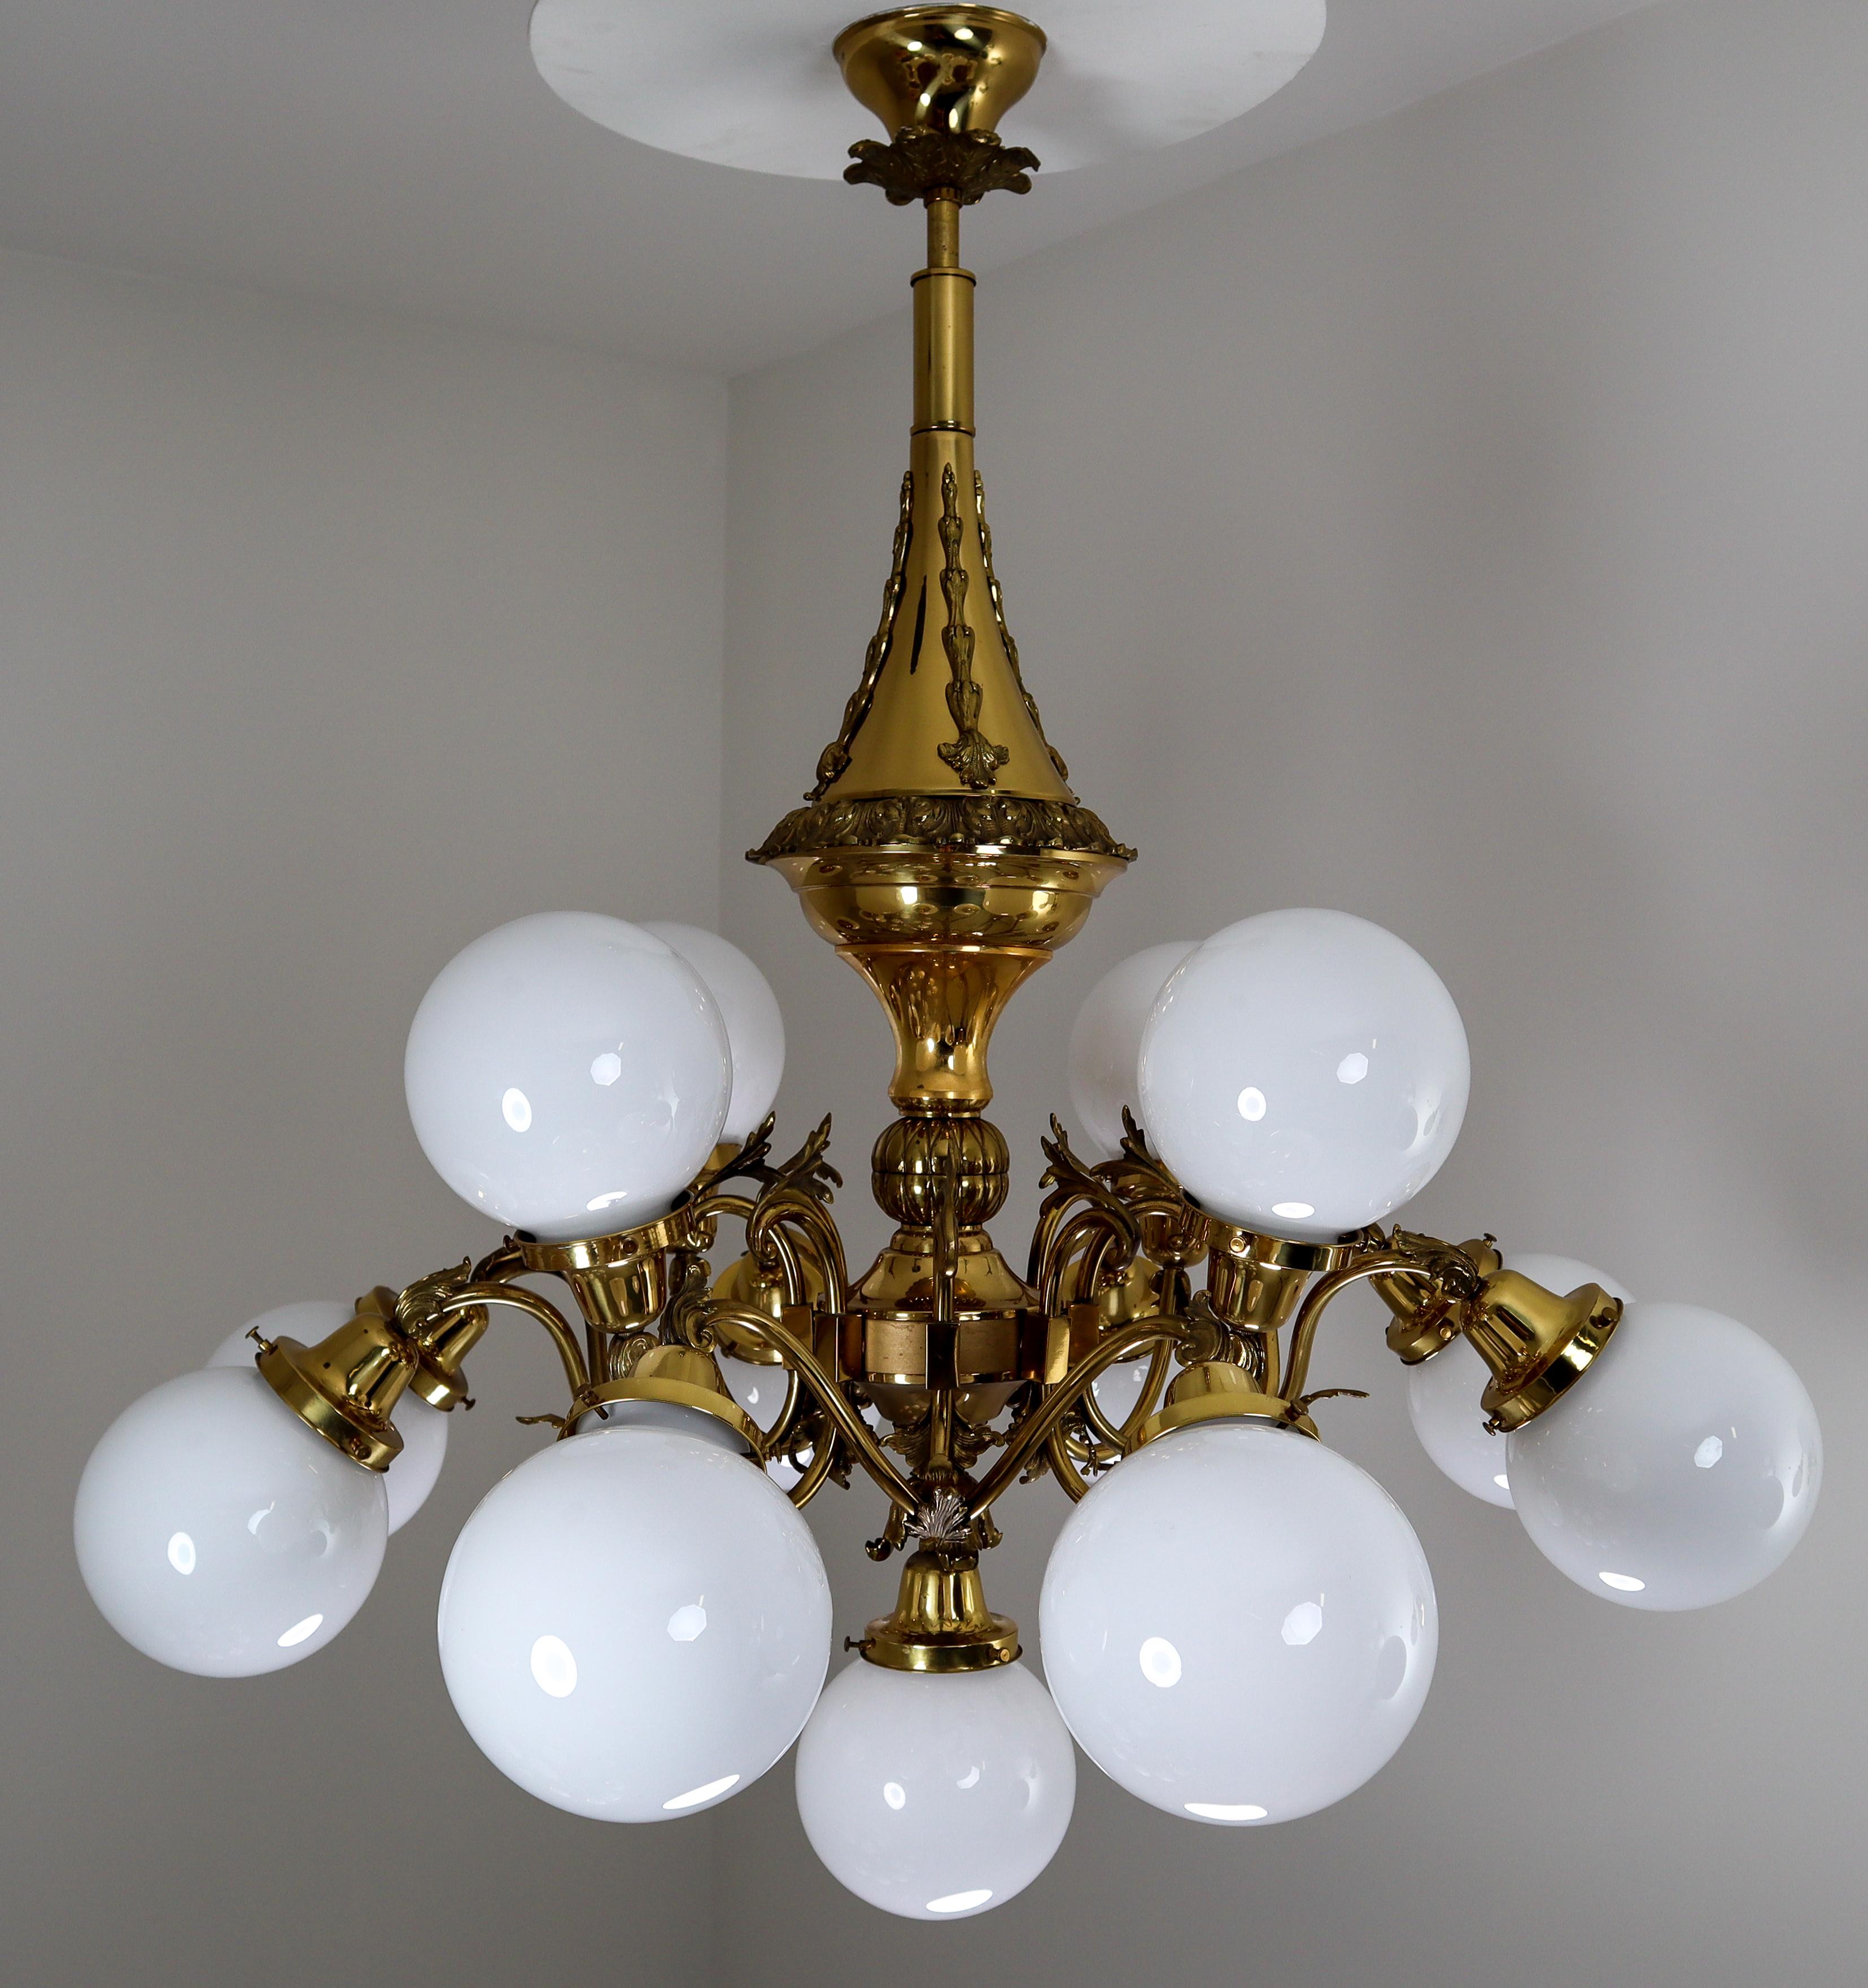 Five monumental brass chandeliers with opaline glass globes from the National Gallery Praque.

Monumental and chic design set of five chandeliers with high quality brass fixture and luxury opaline glass globes. These chandeliers with brass frame